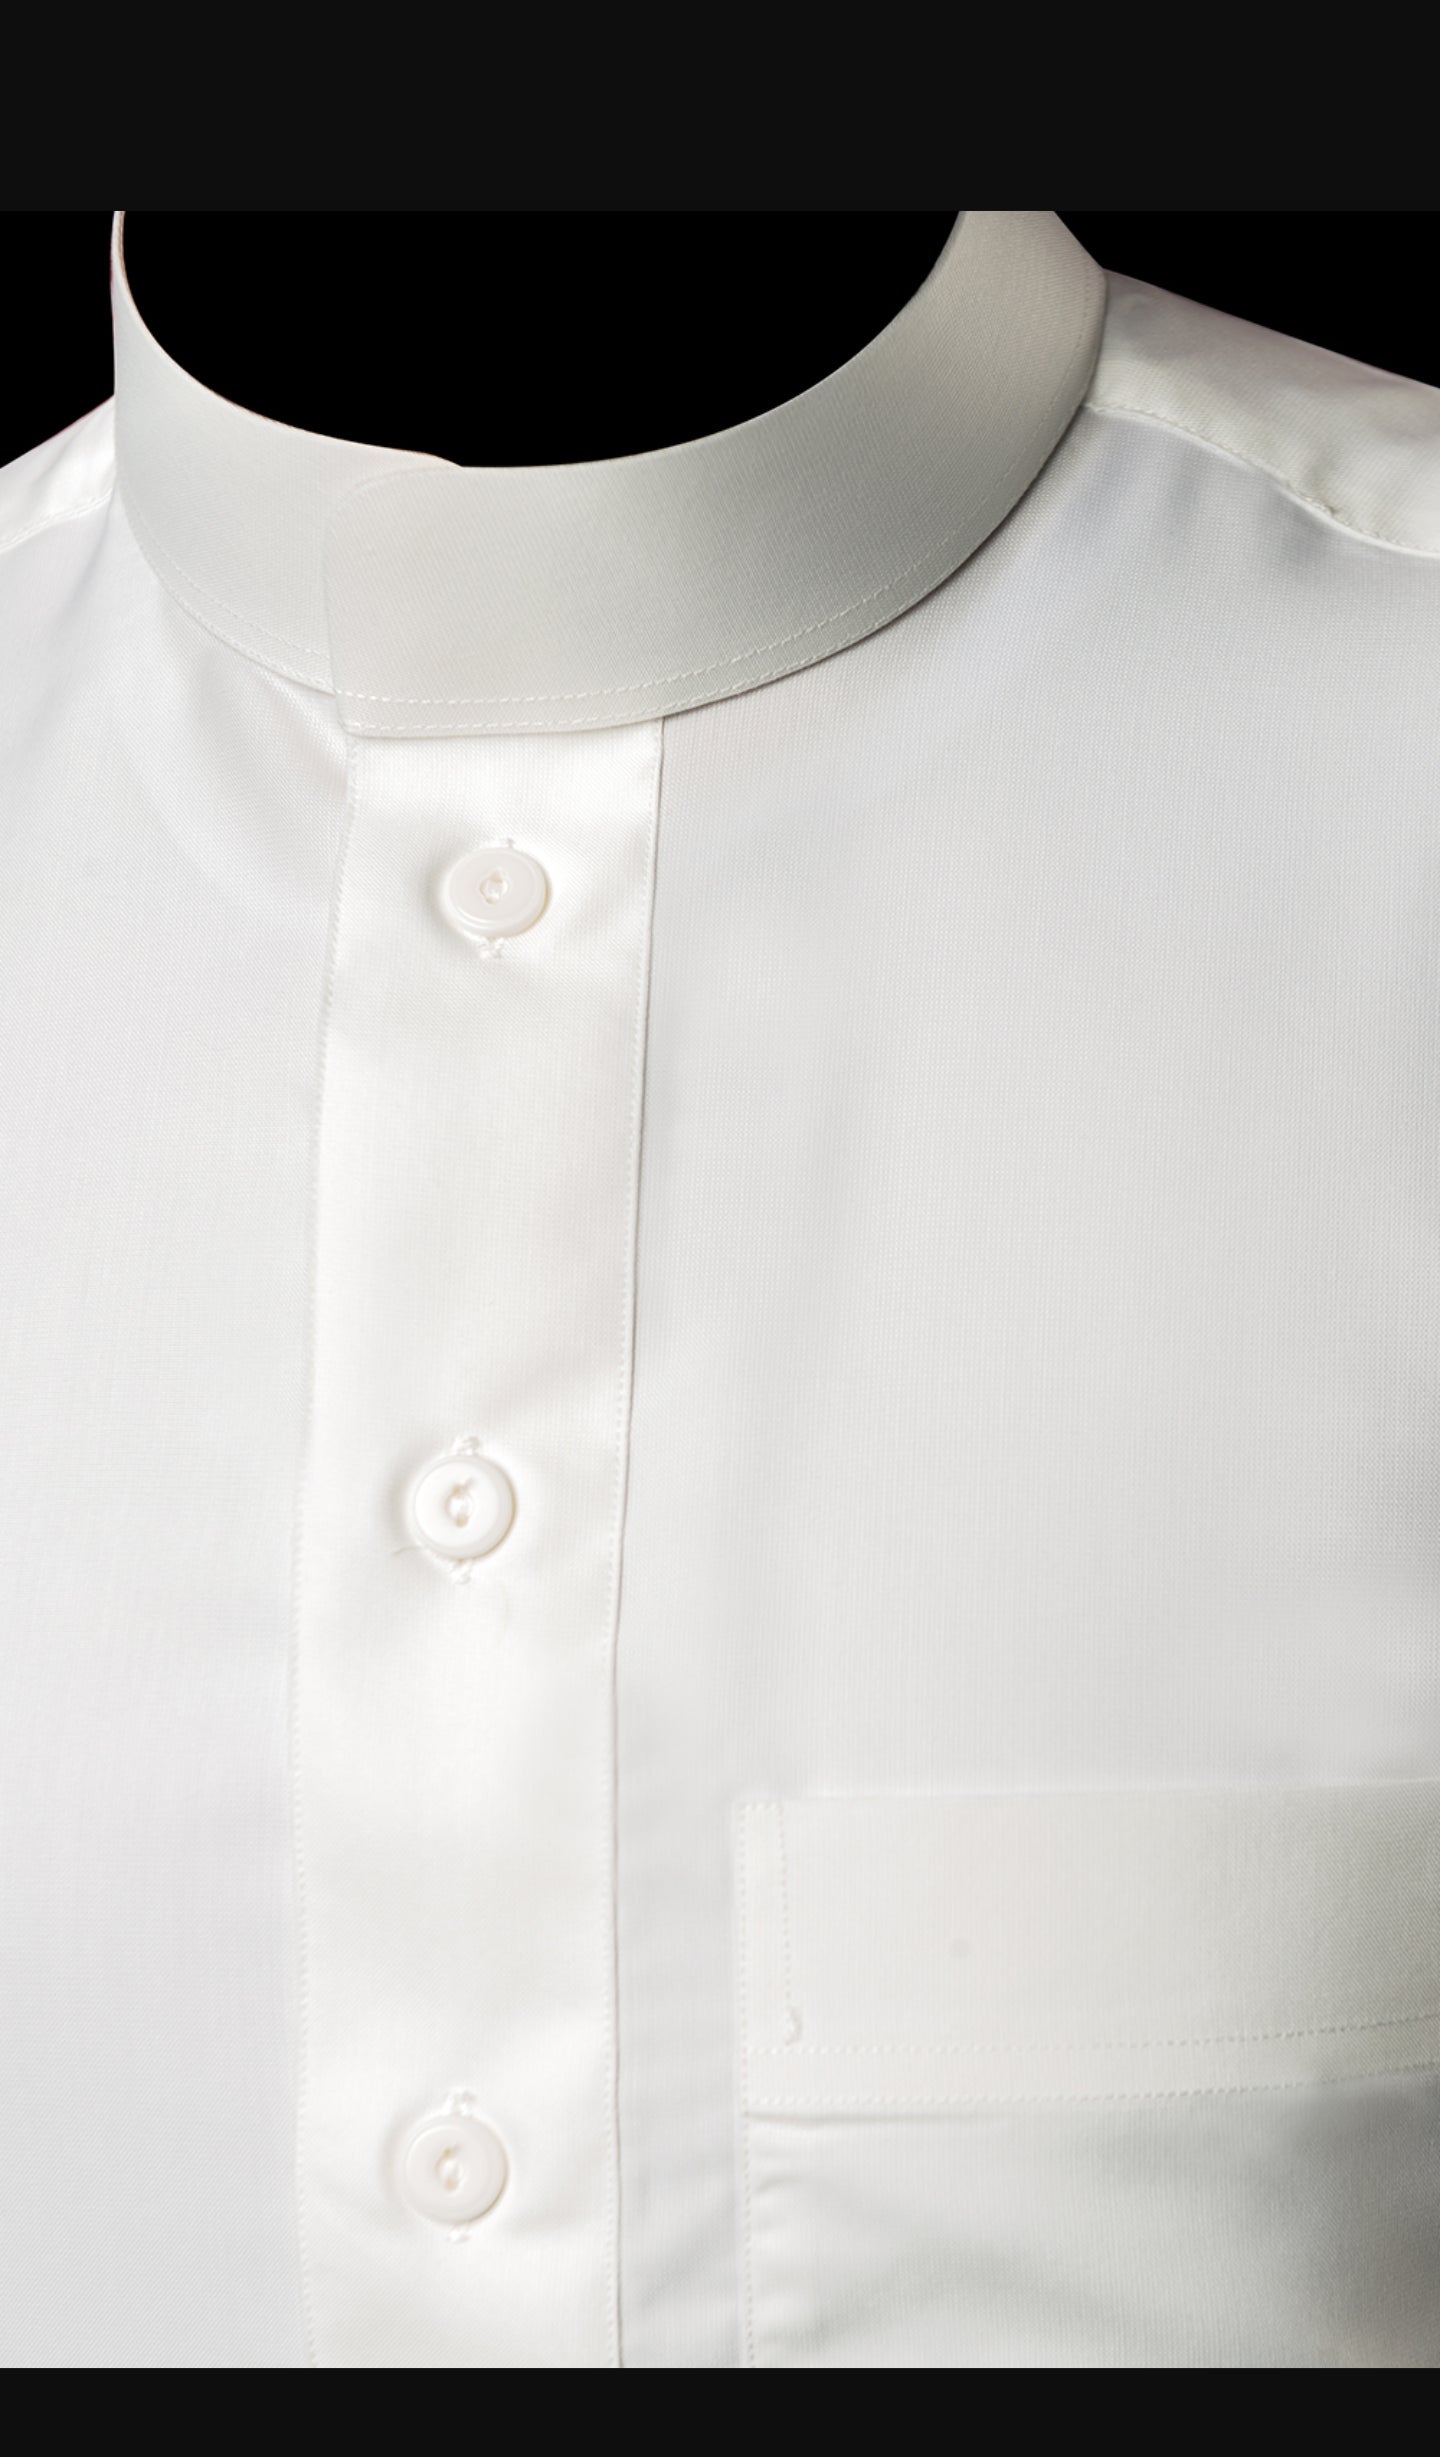 Our Mens Thobe is a Traditional Saudi Style Thobe. It's an elegant design white Thobe with traditional style collar, full sleeves and perfectly stitch. This white Thobe is made with high quality premium material. This Mens Thobe will poise your style, redefine your elegance while fulfilling the religious obligations. 